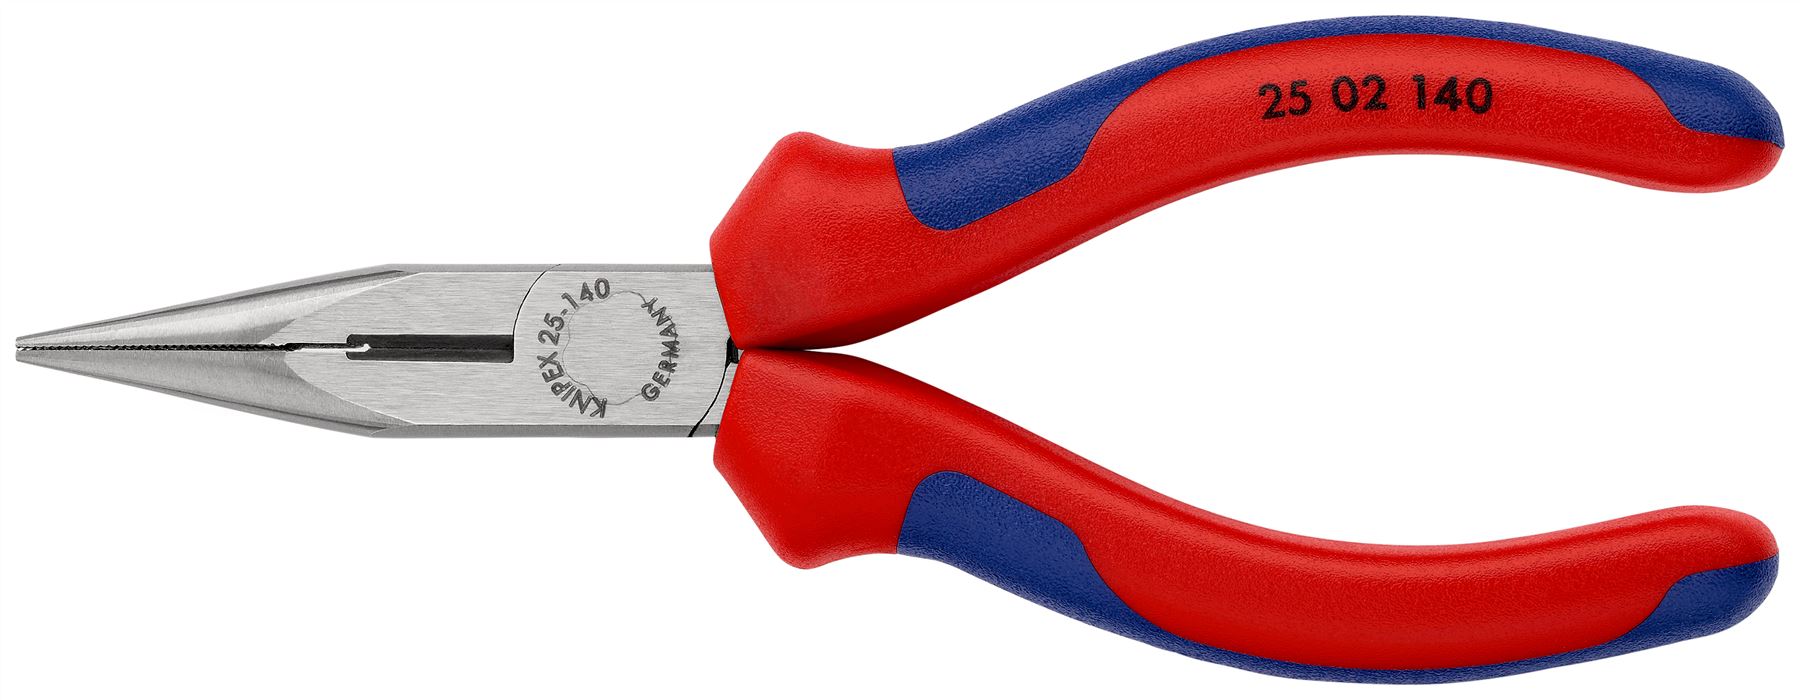 Knipex Snipe Nose Side Cutting Pliers 140mm Long Nose Radio Plier 25 02 140